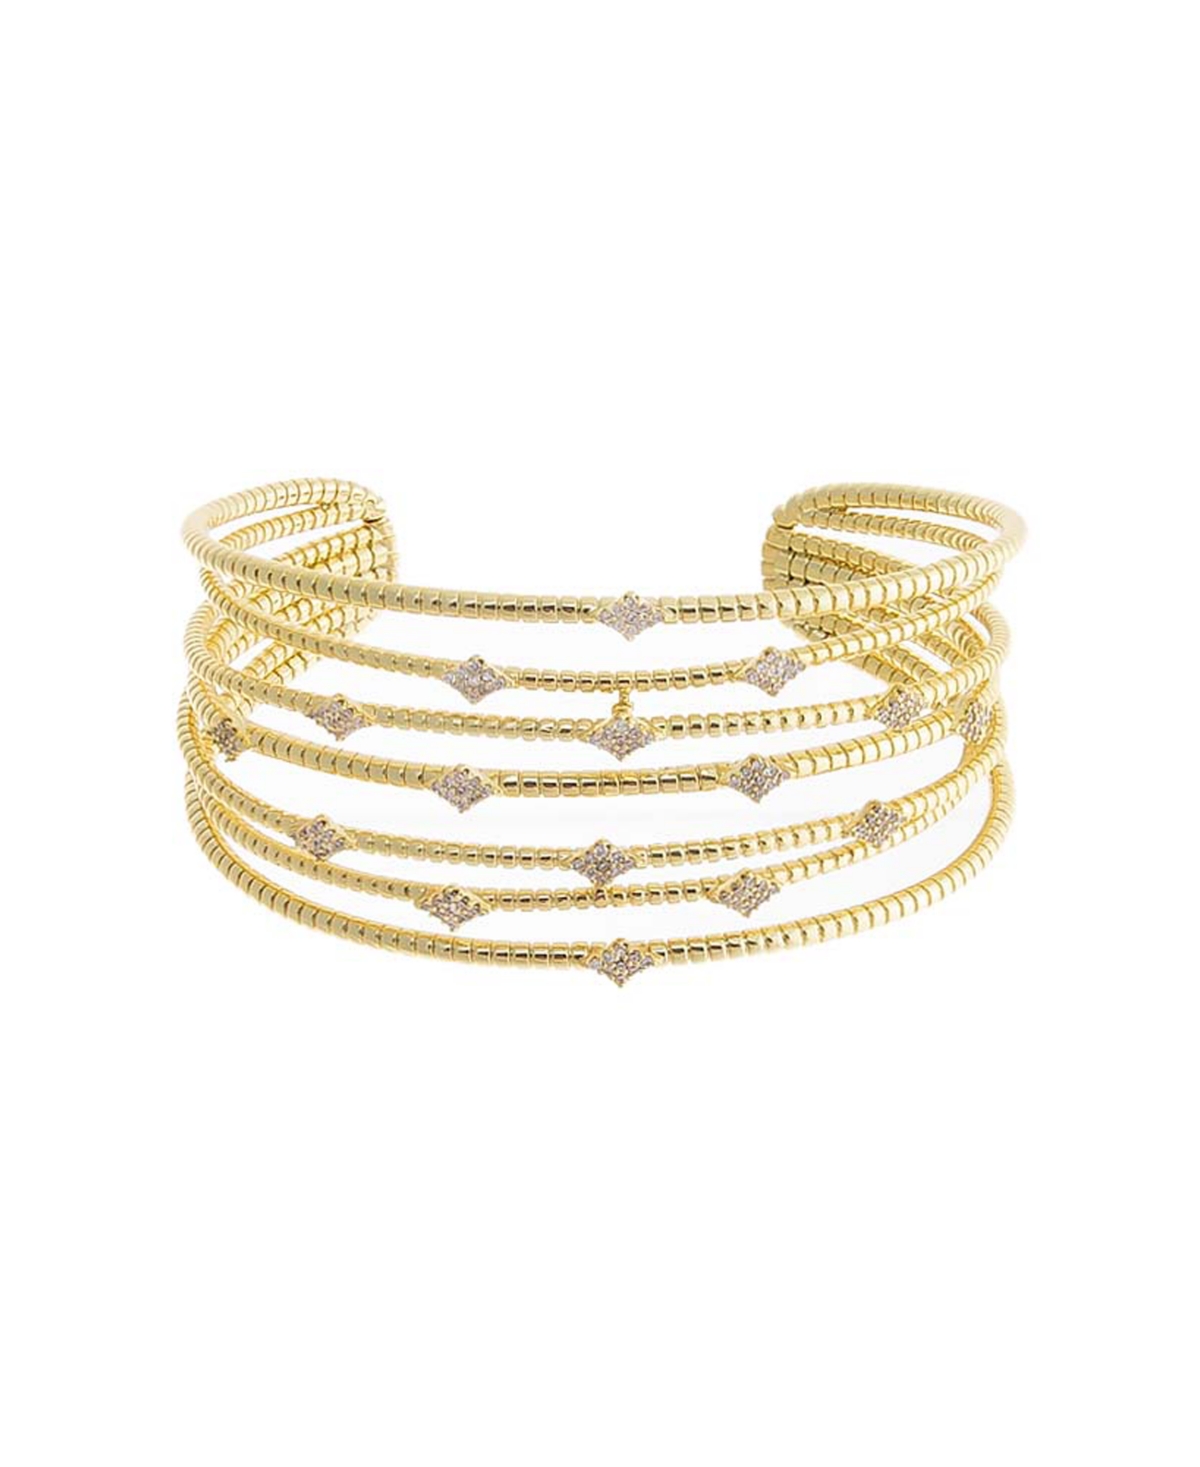 Pave Accented Multi Row Open Bangle Bracelet - Gold